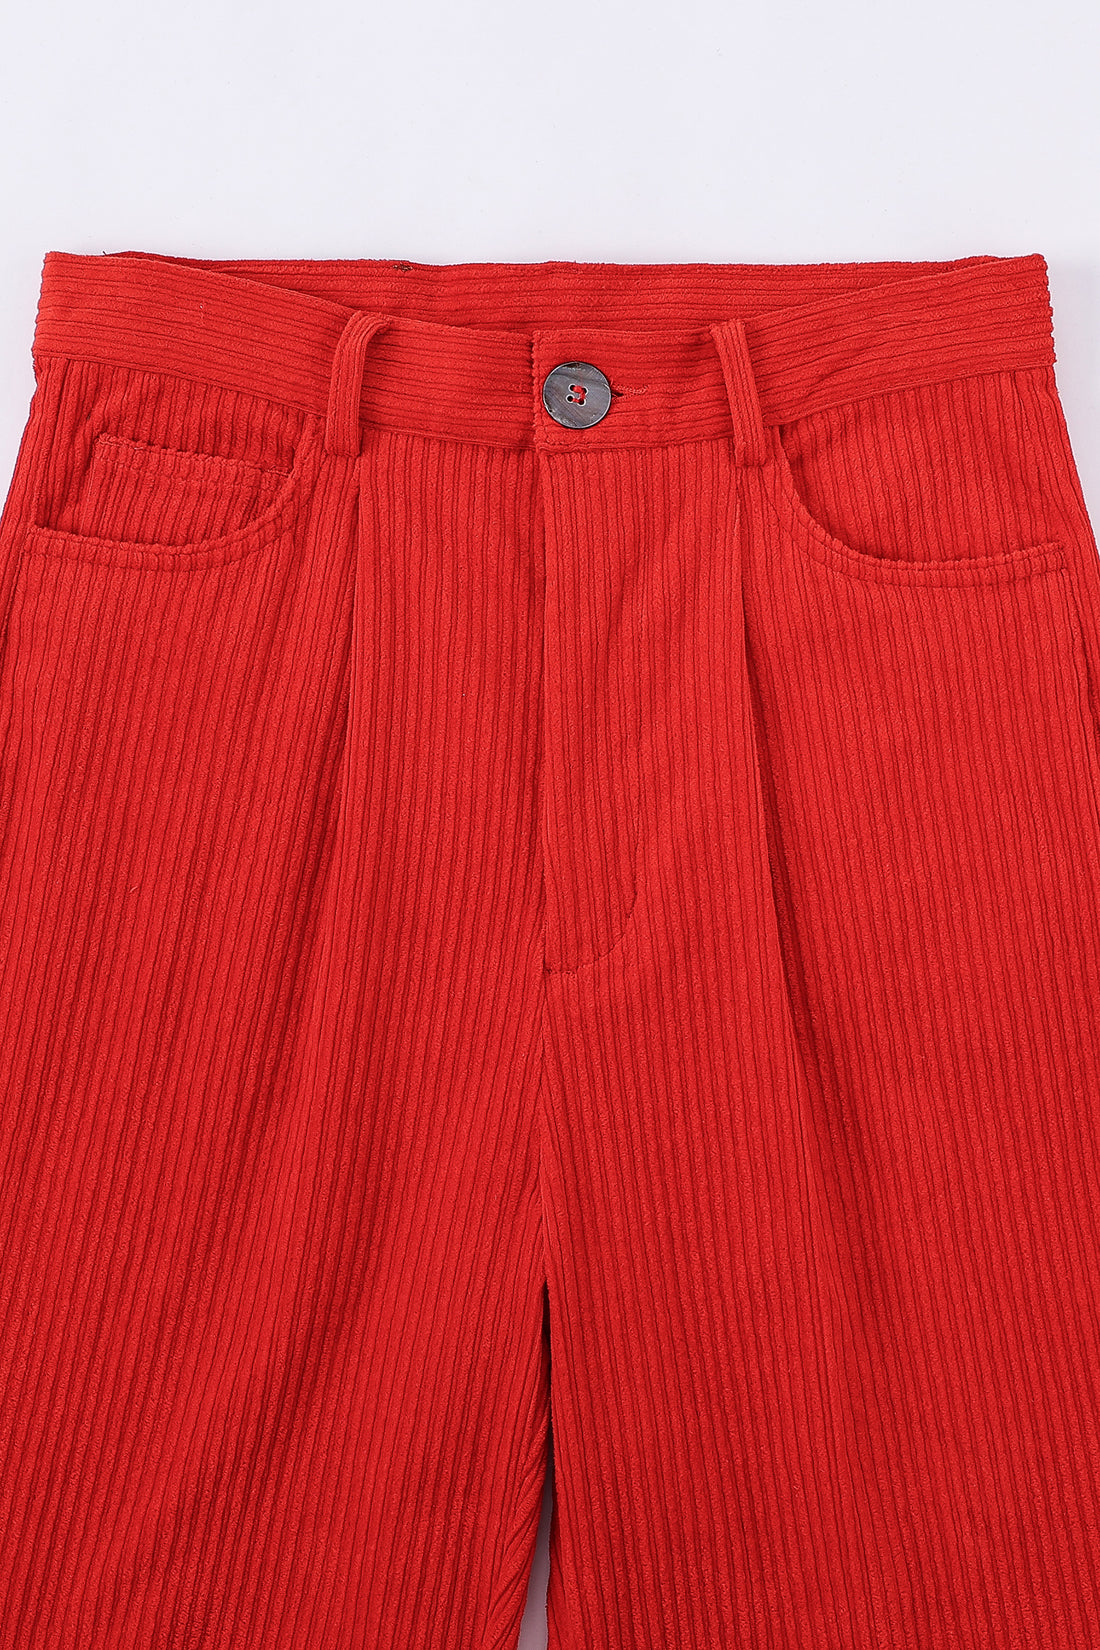 UNISEX RED Corduroy Grampa Trousers